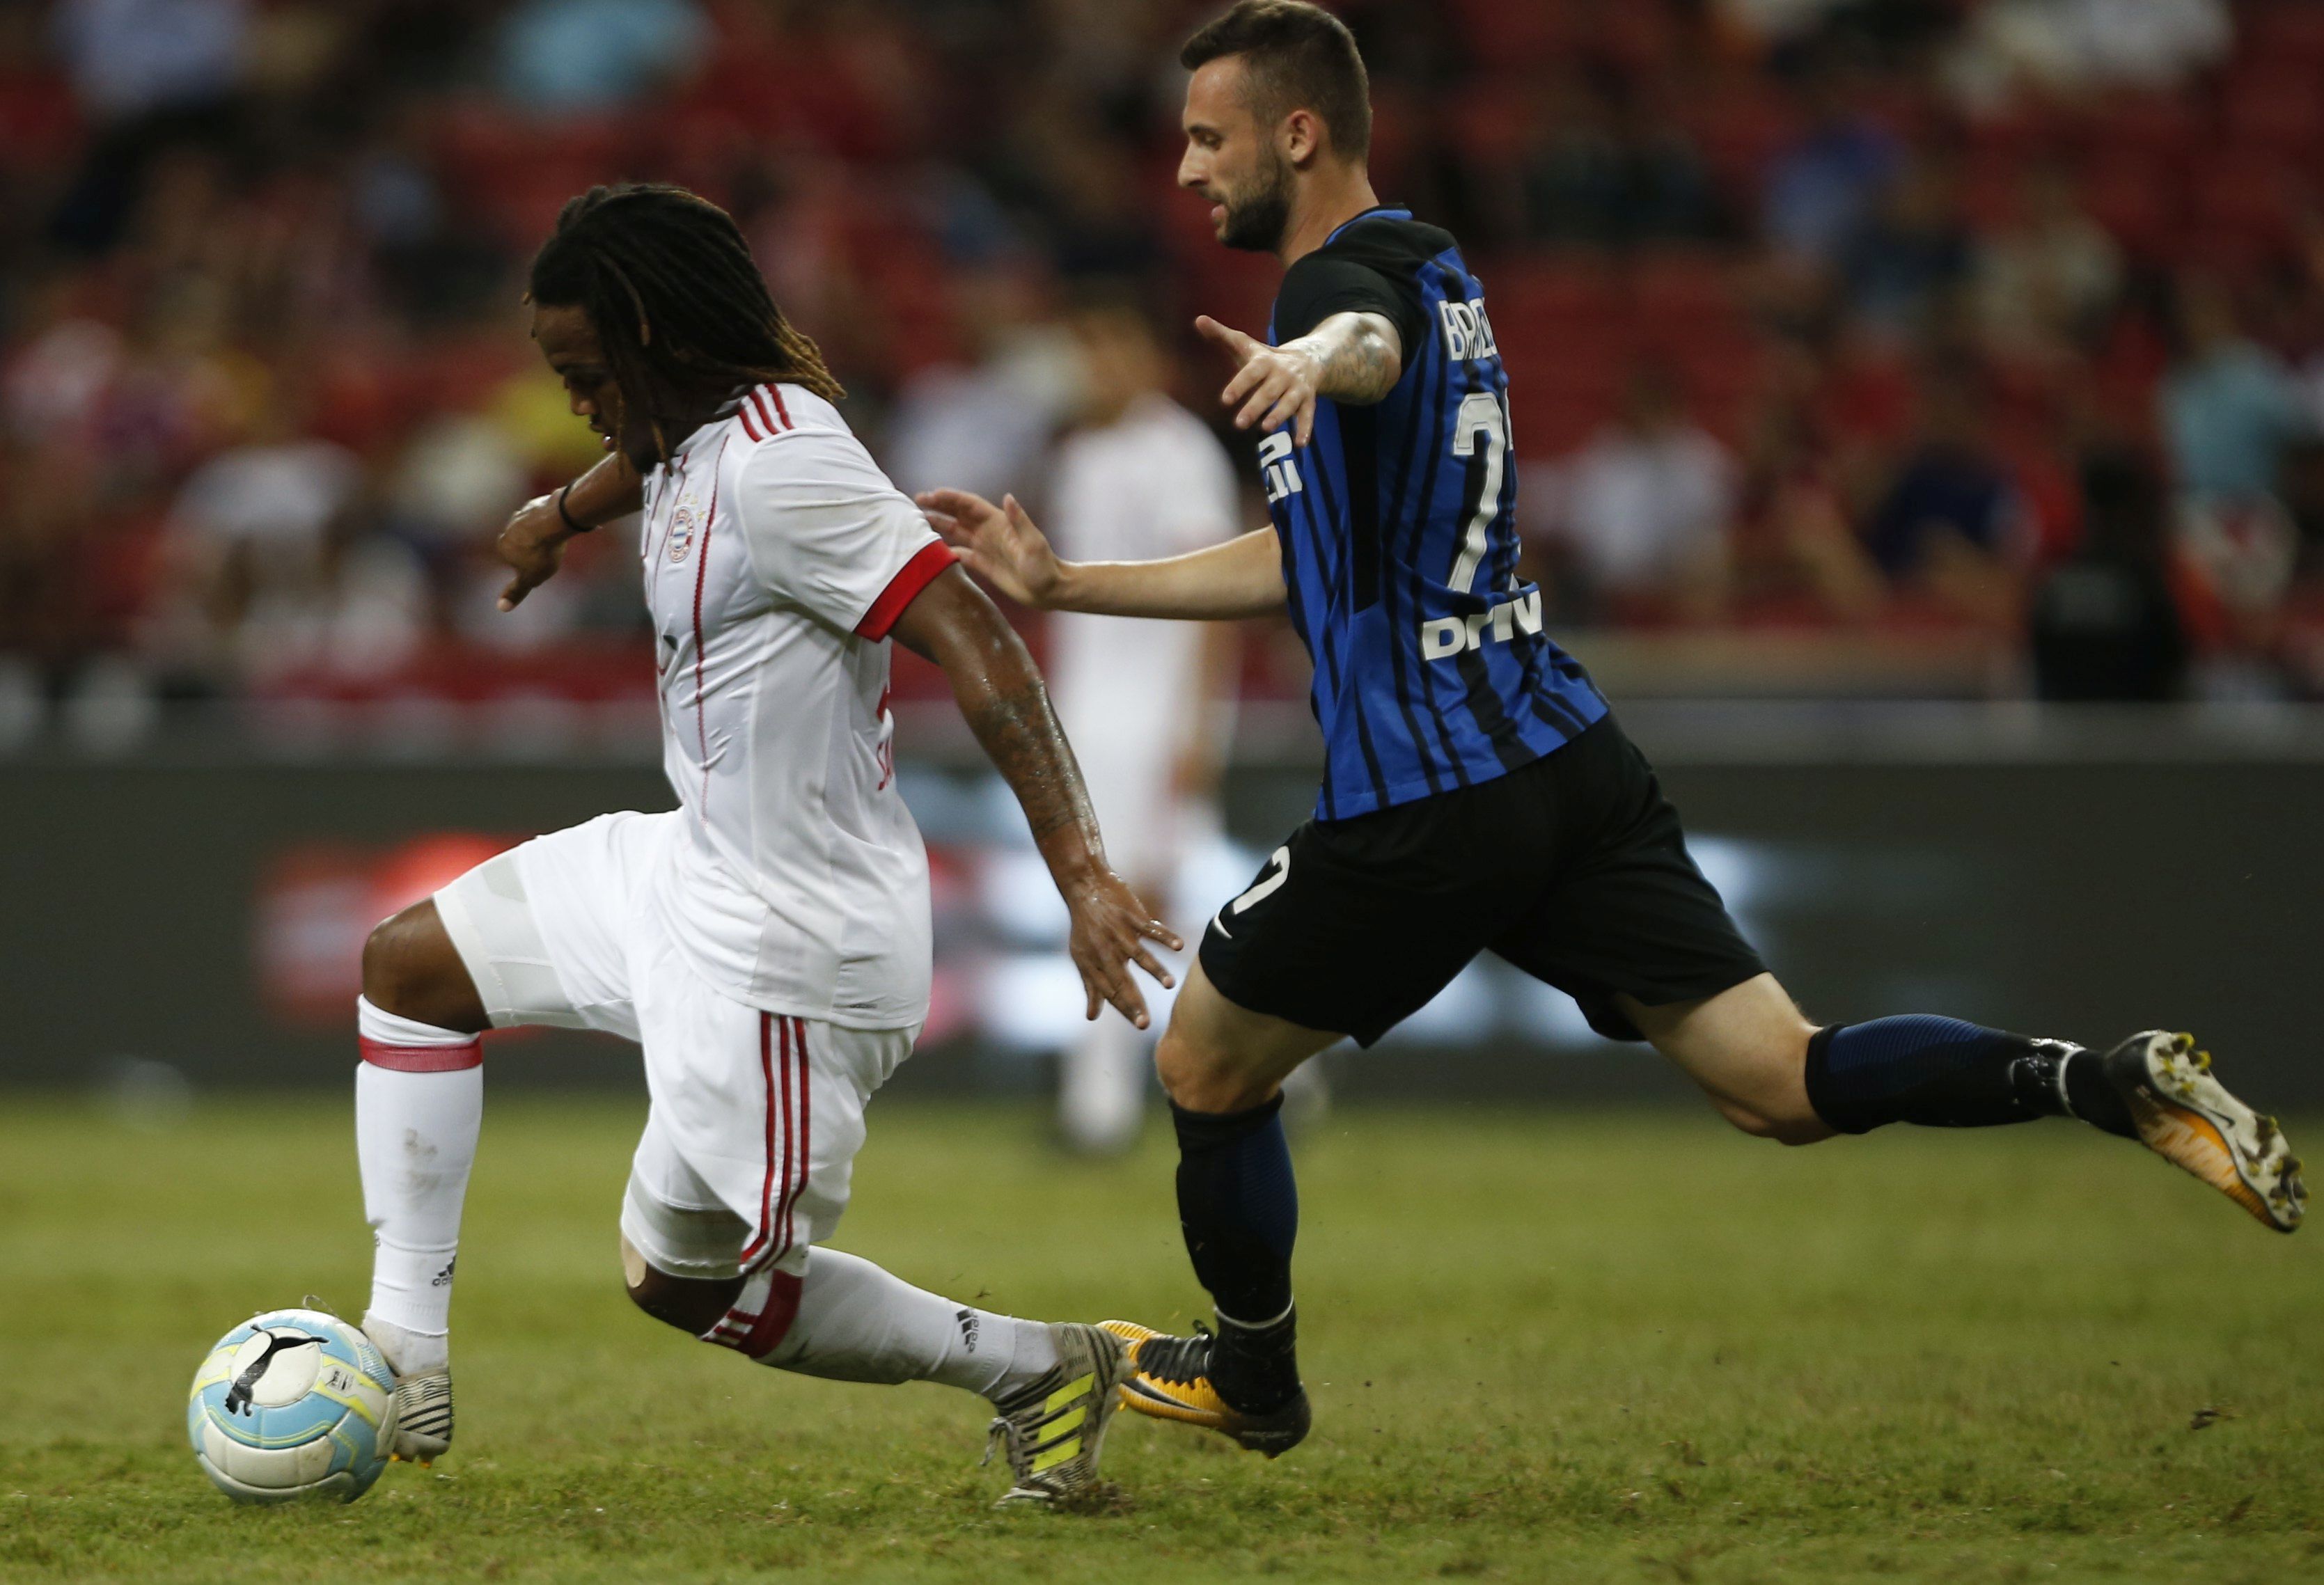 epa06112510 FC Bayern's Renato Sanches (L) in action against Internazionale's Marcelo Brozovic (R) during the 2017 International Champions Cup (ICC) match between FC Bayern Munich and Fc Internazionale FC at the National Stadium in Singapore, 27 July 2017.  EPA/WALLACE WOON